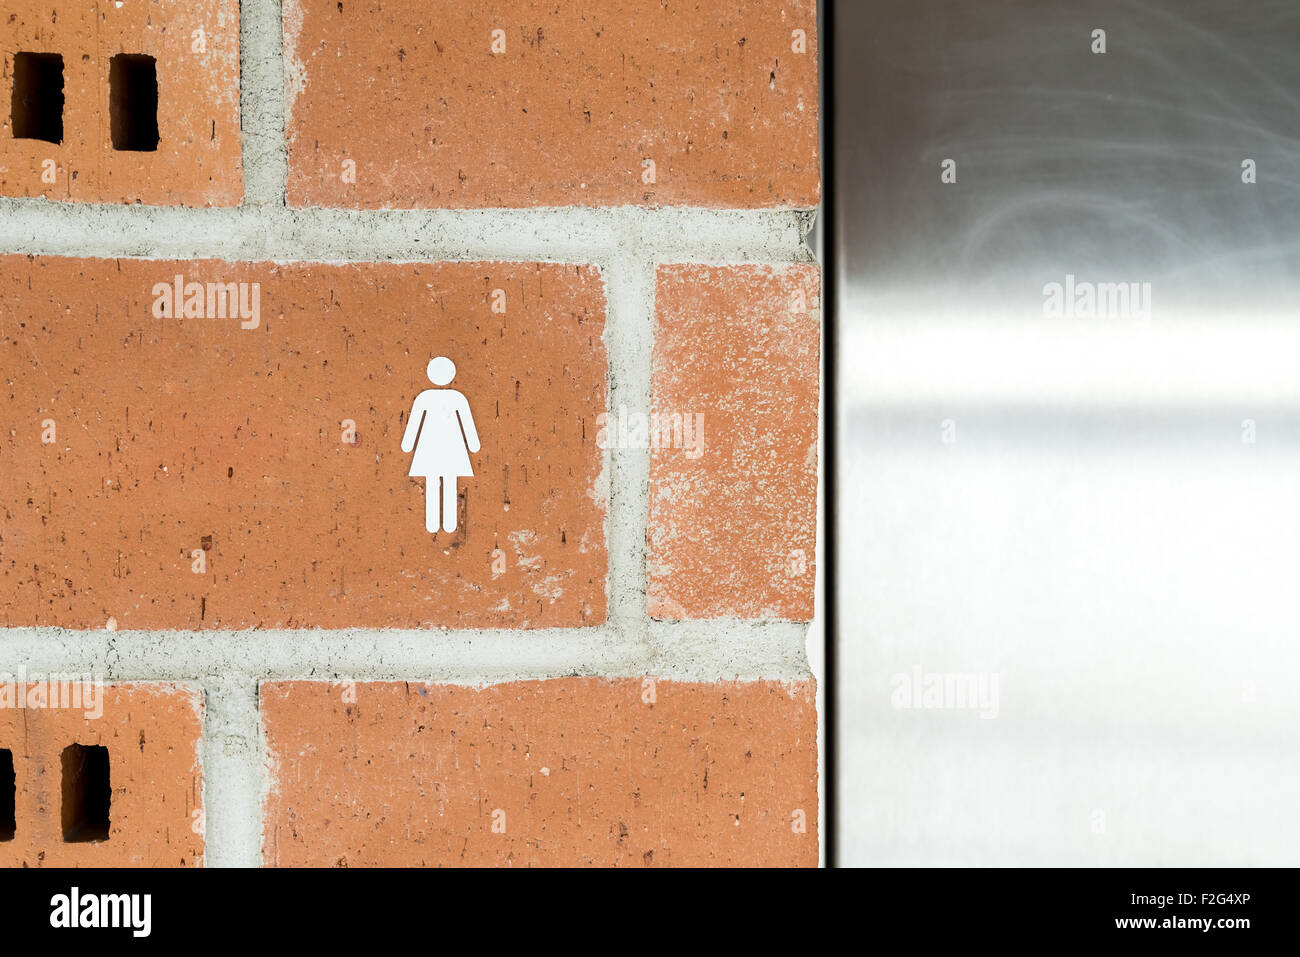 Public Restroom For Women Sign Stock Photo